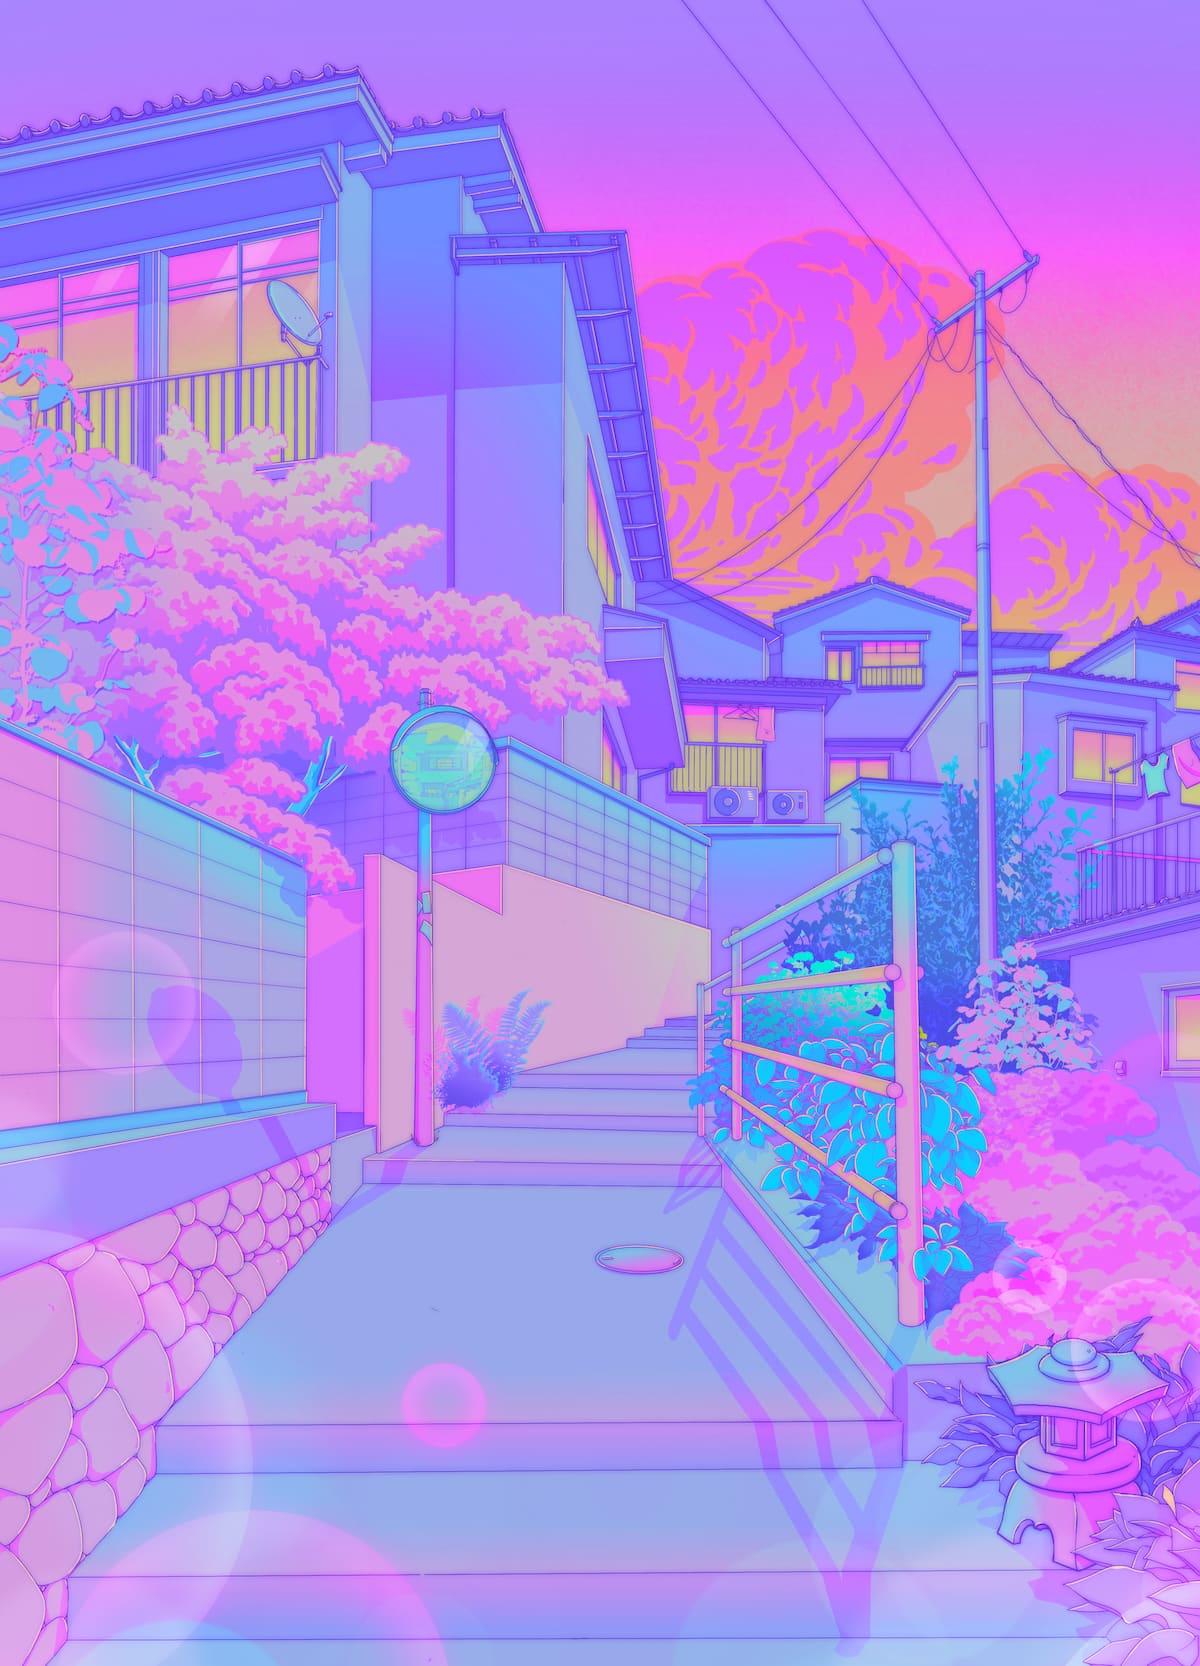 Artist Creates Immersive Worlds in a Pastel Pink Color Palette